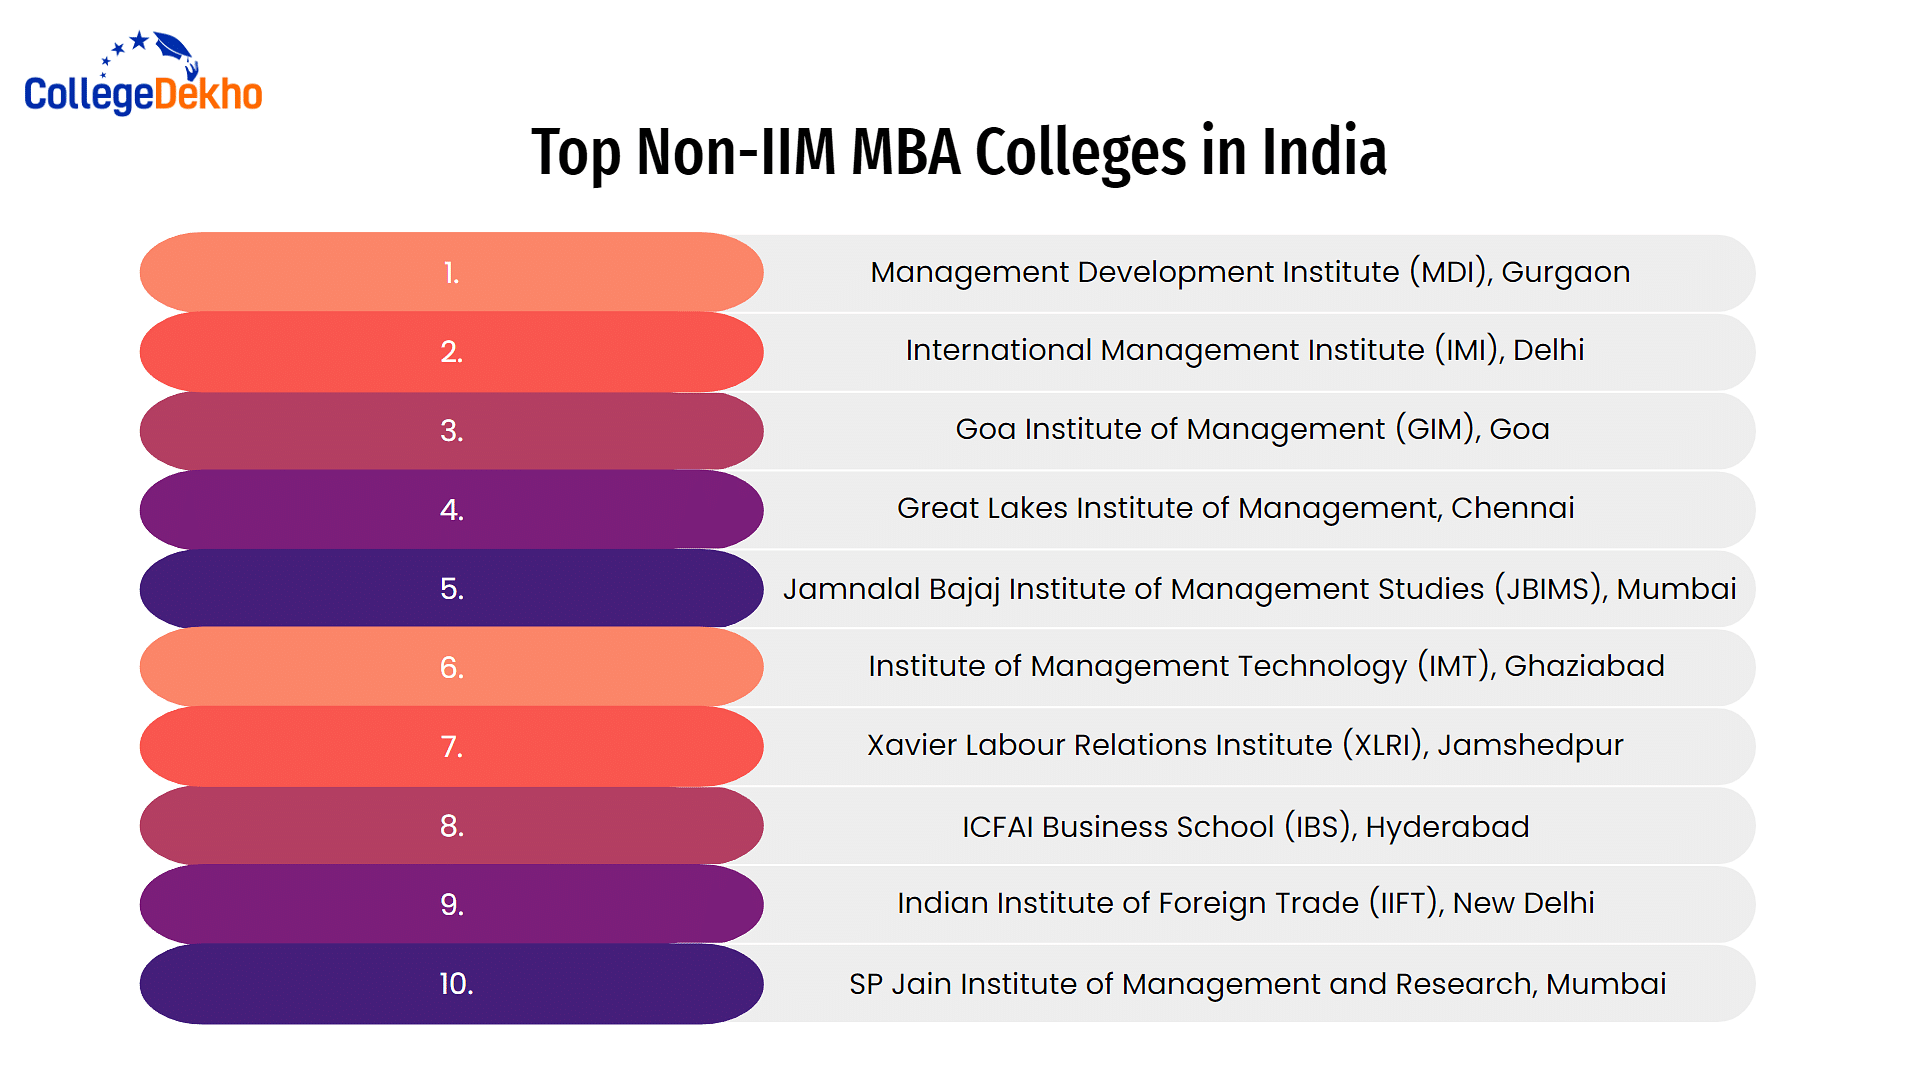 Top Non-IIM MBA Colleges in India